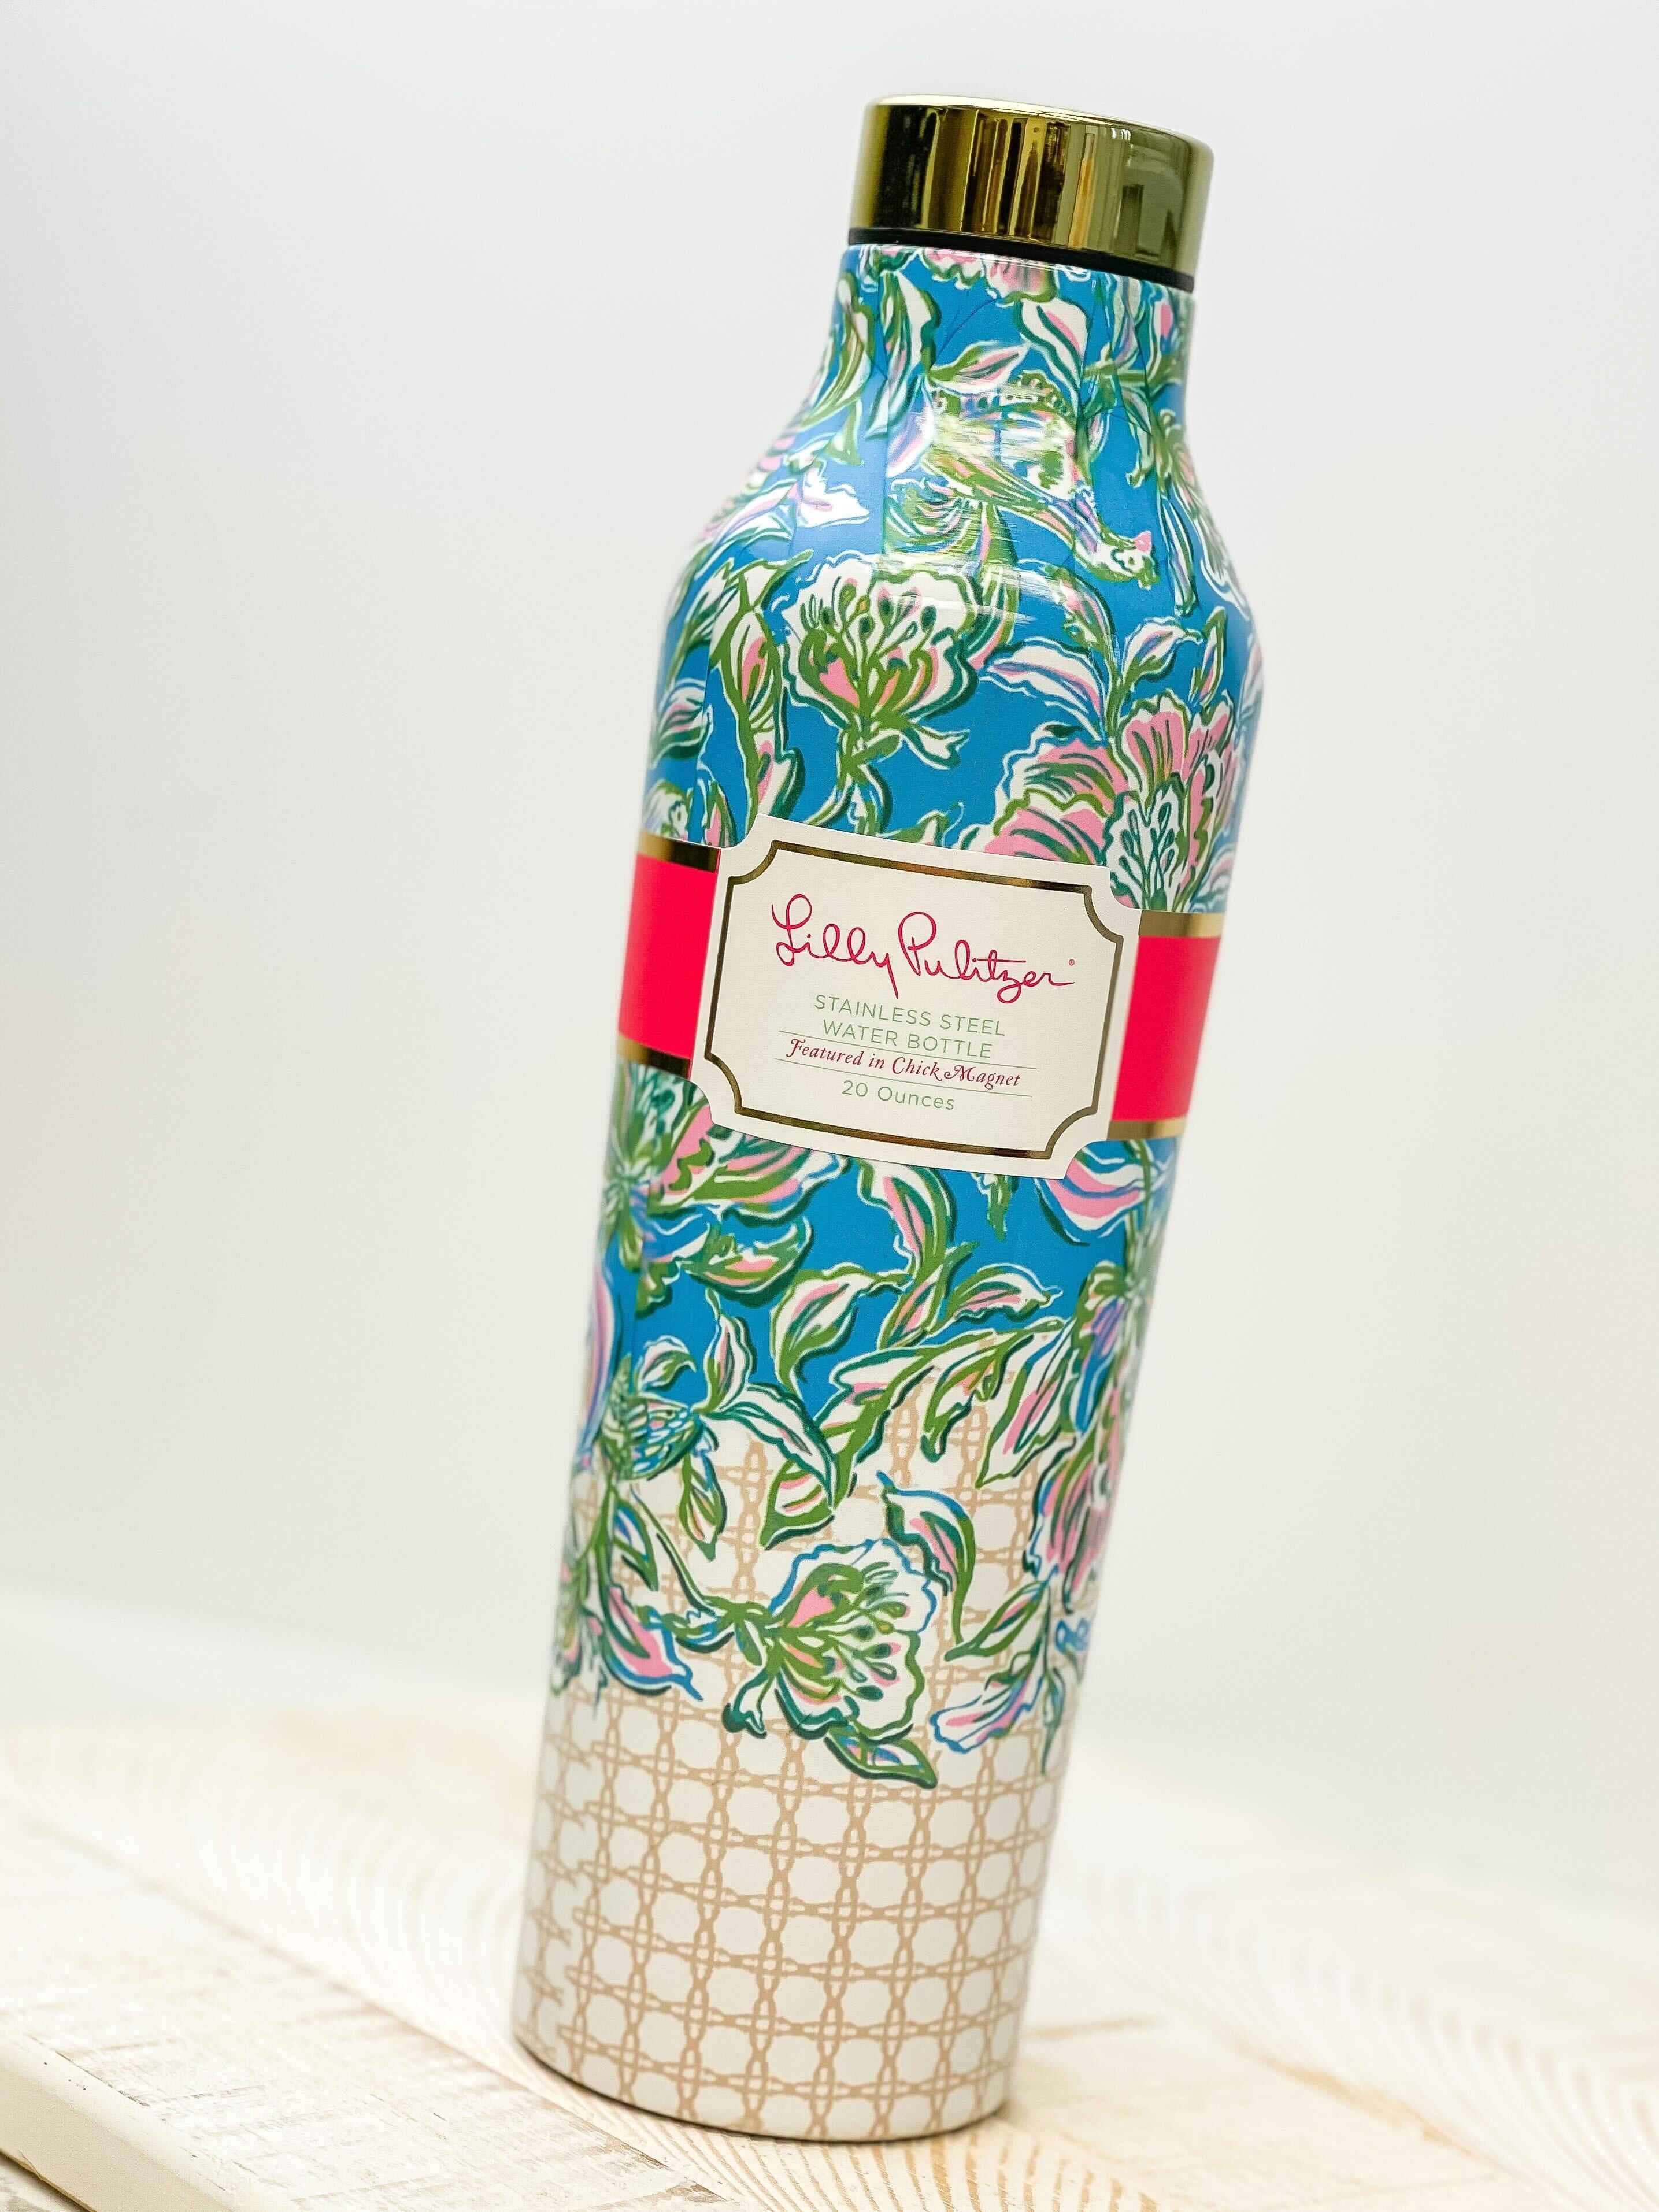 Stainless Steel Water Bottle by Lilly Pulitzer - Chick Magnet